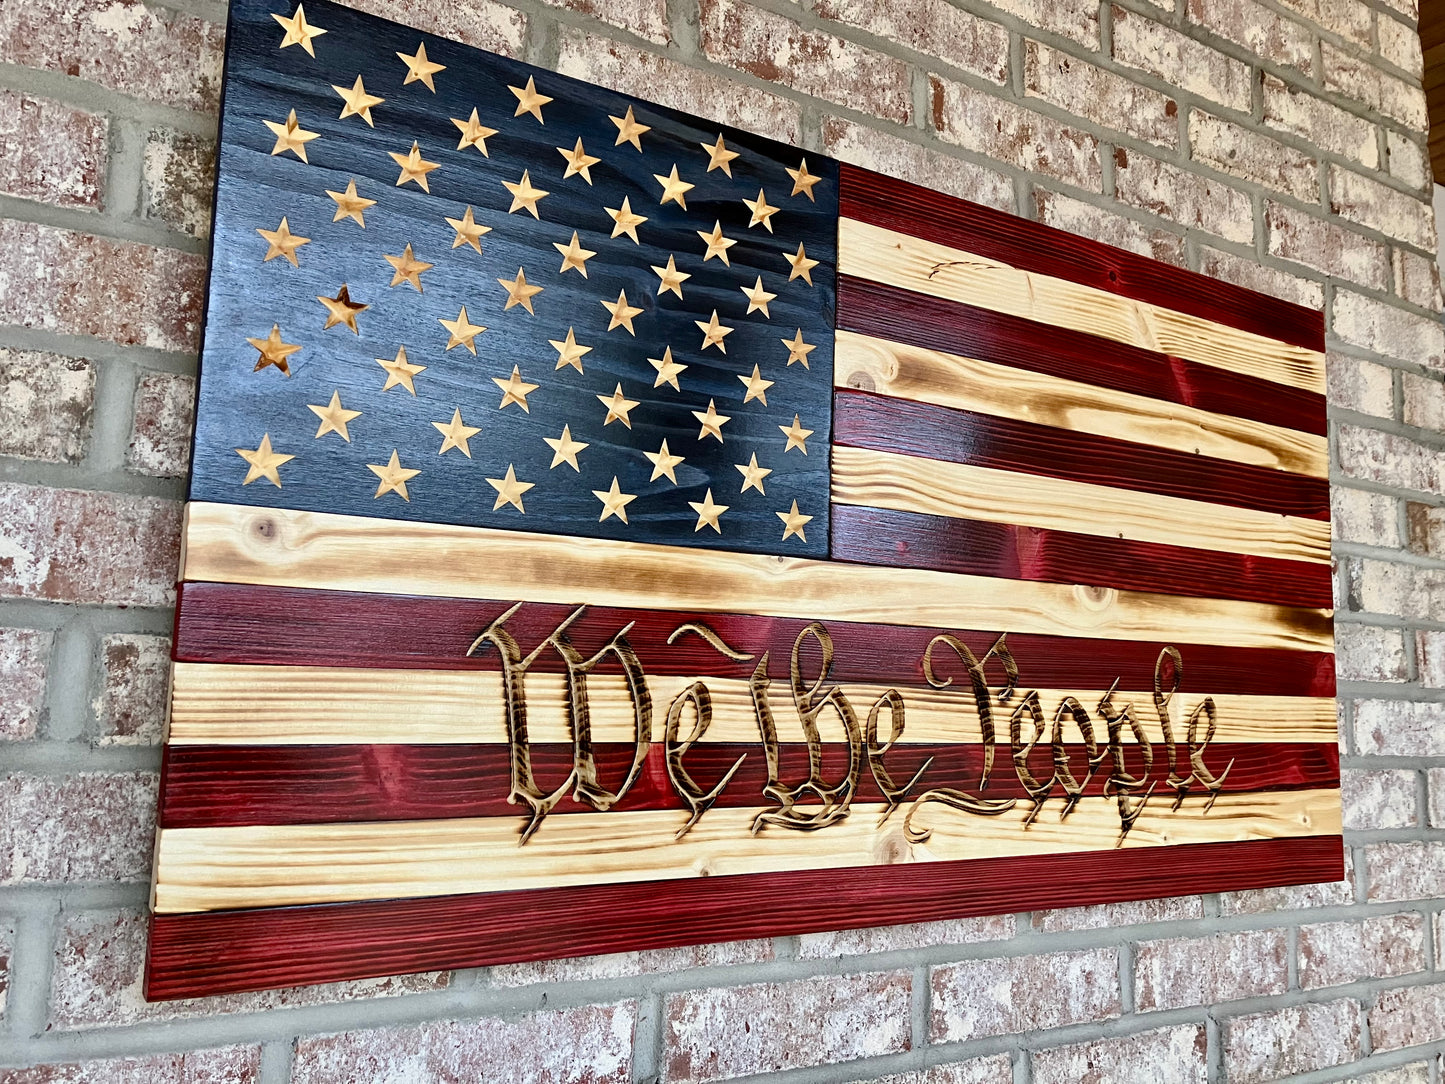 Handmade Wooden American Flag Engraved with "We The People"